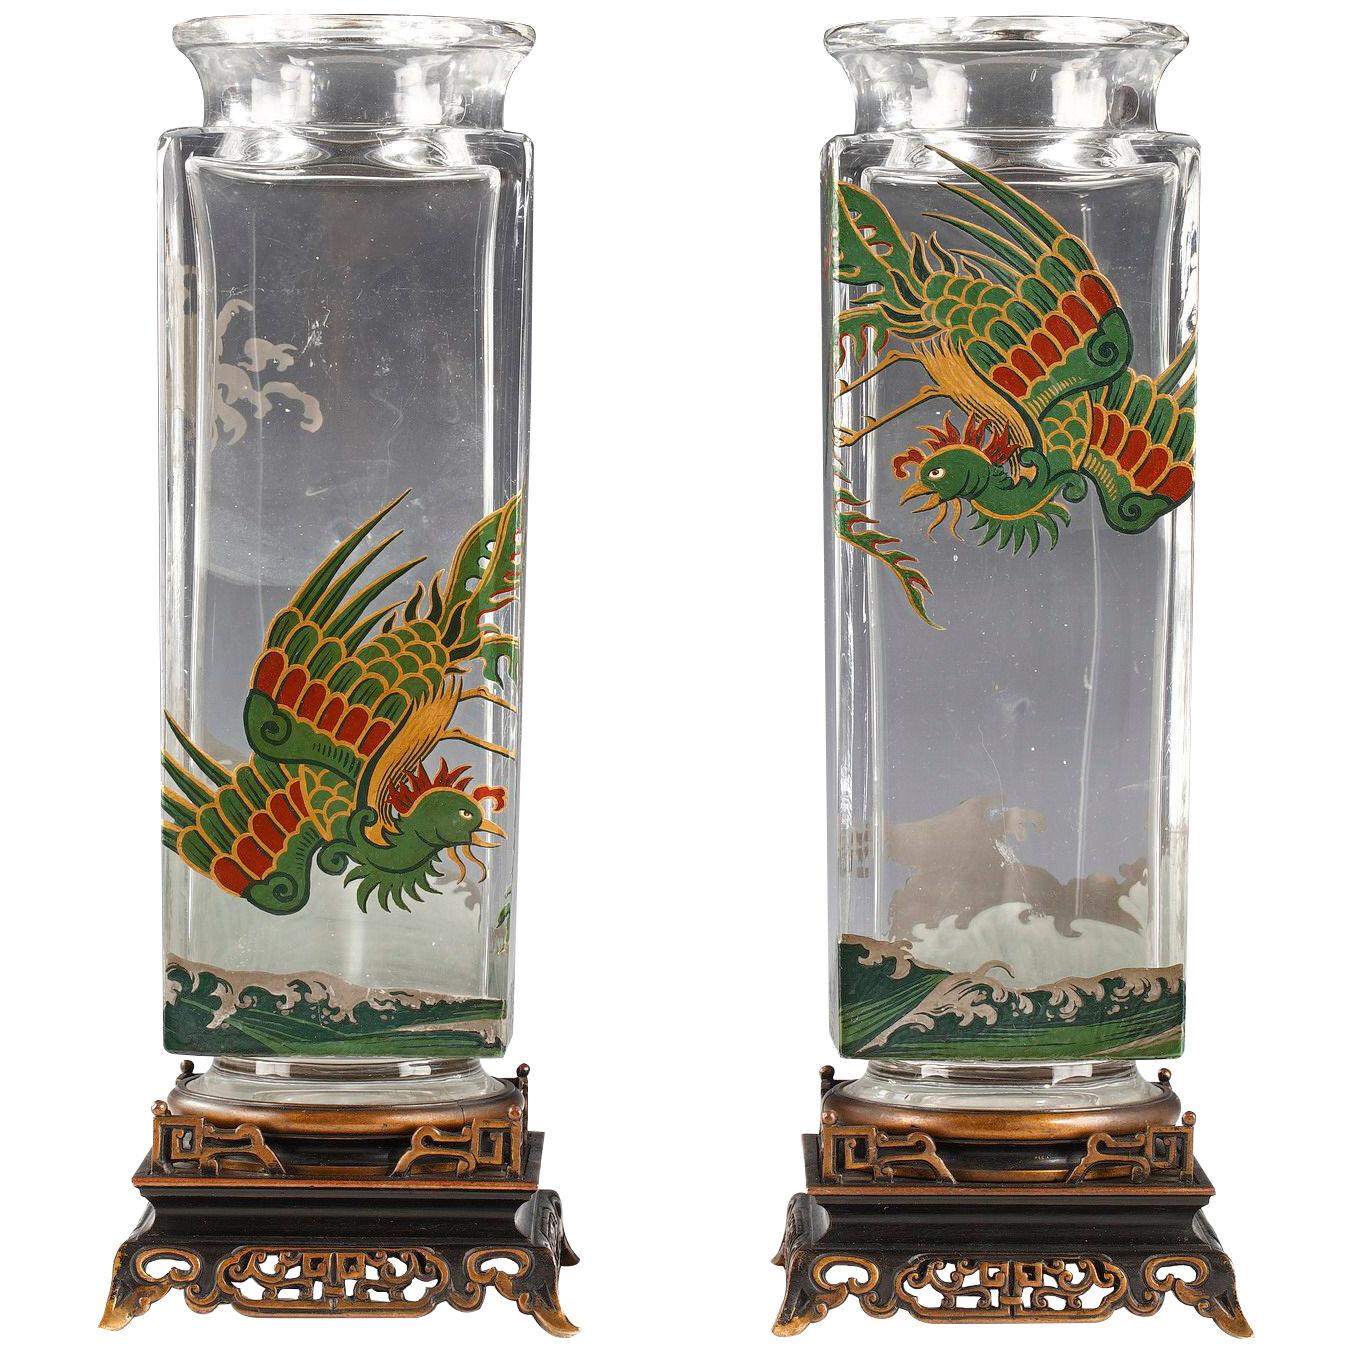 Pair of Birds of Paradise Vases Attributed to Baccarat, France, Circa 1880